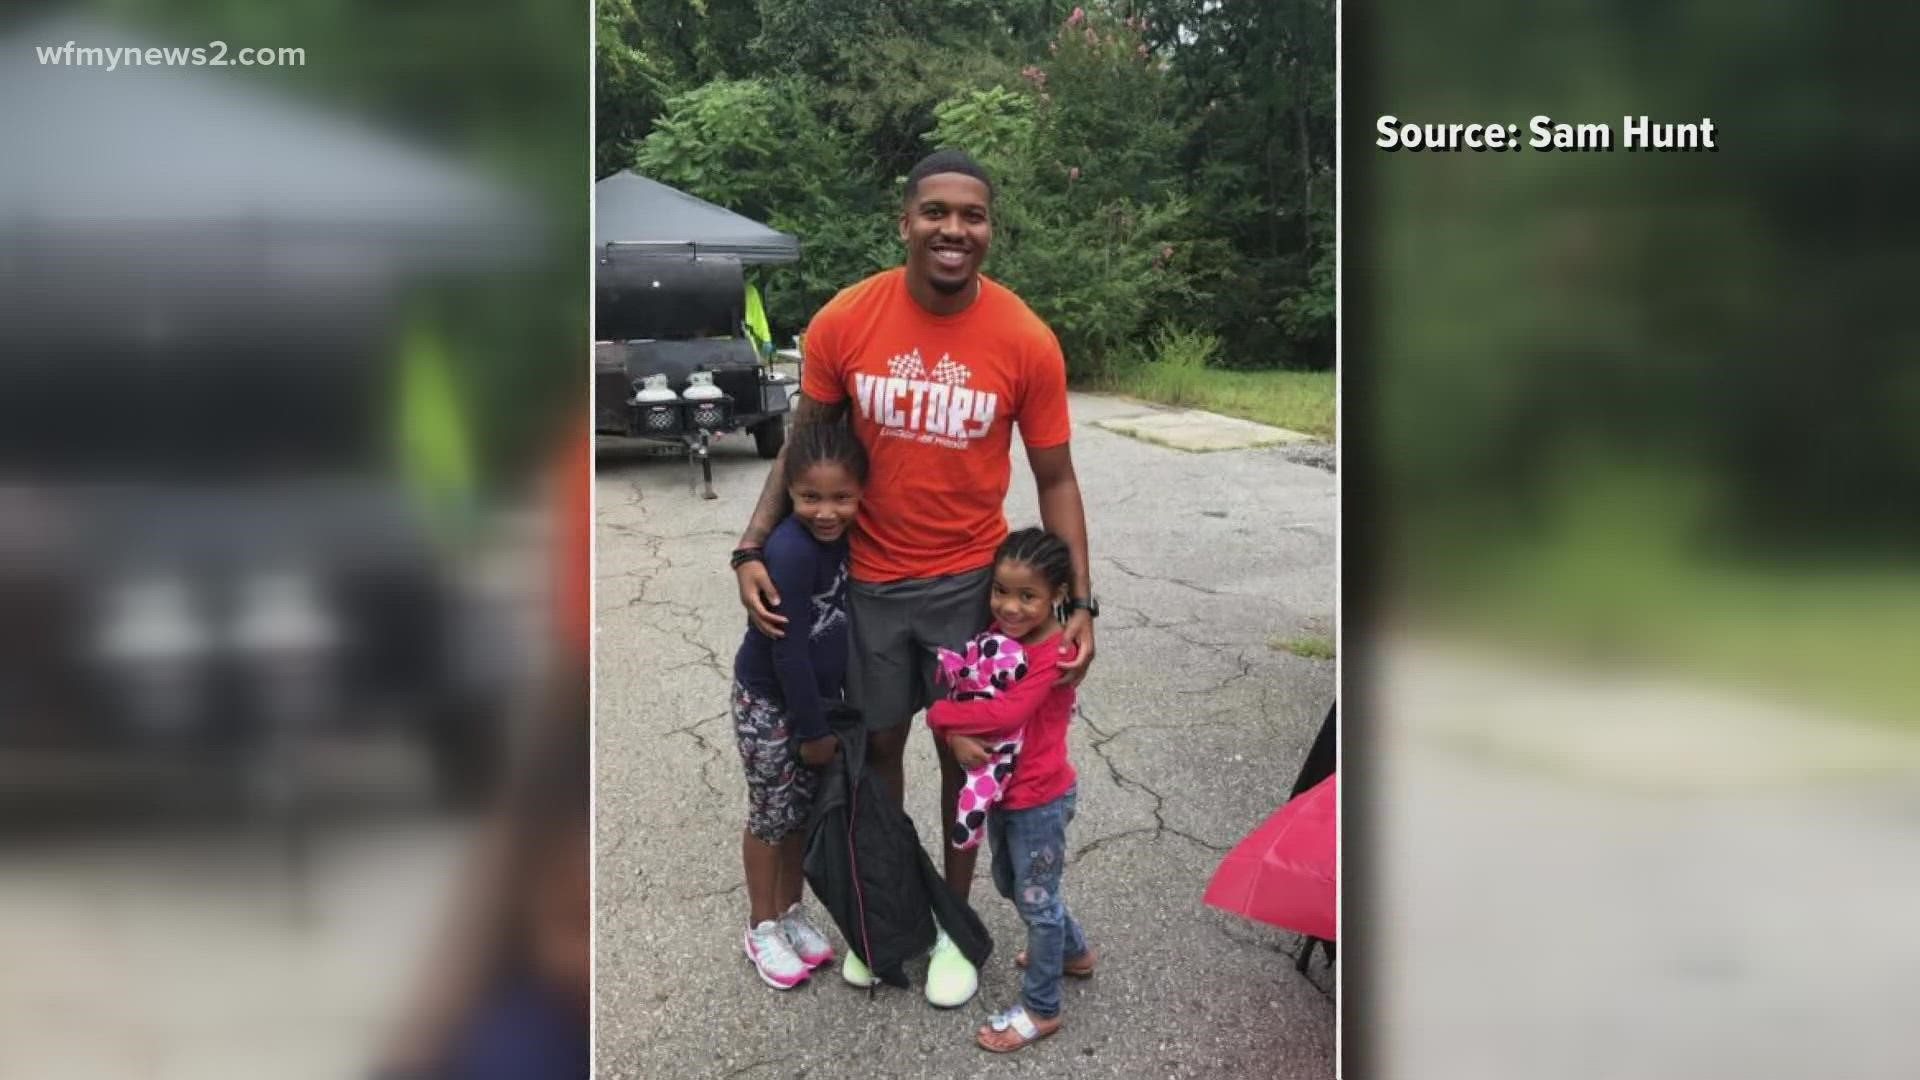 Former NC A&T athlete, Sam Hunt, organizes a back-to-school drive to help Greensboro students.